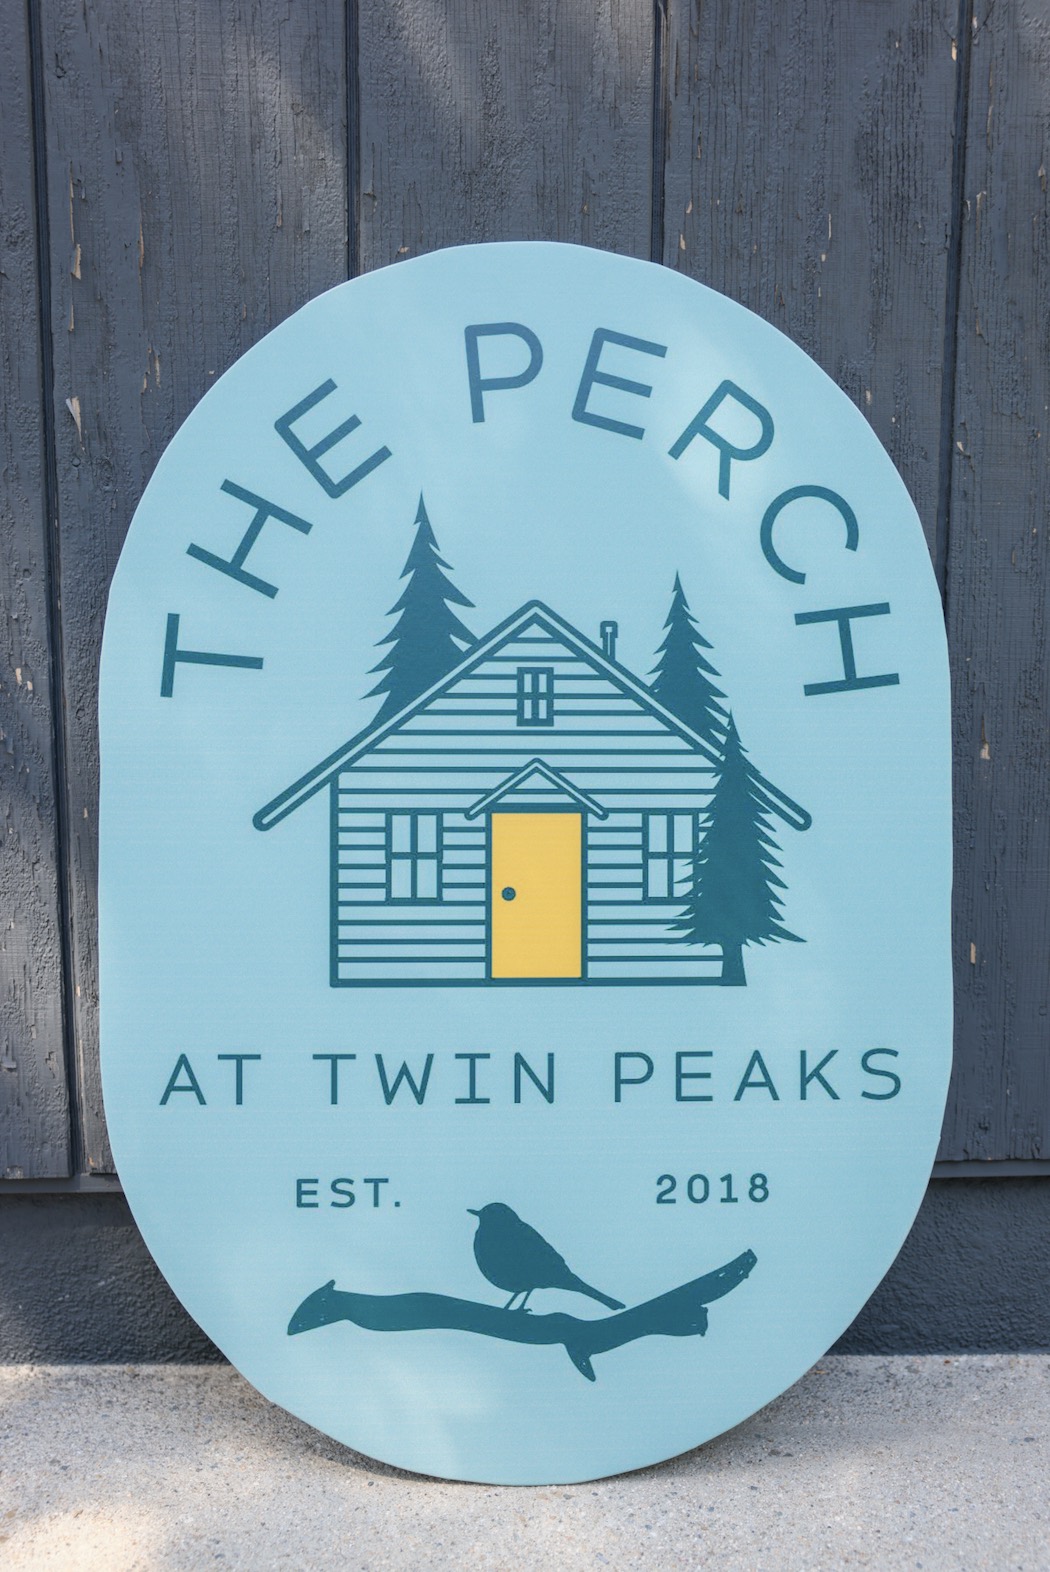 An image of the Perch sign.